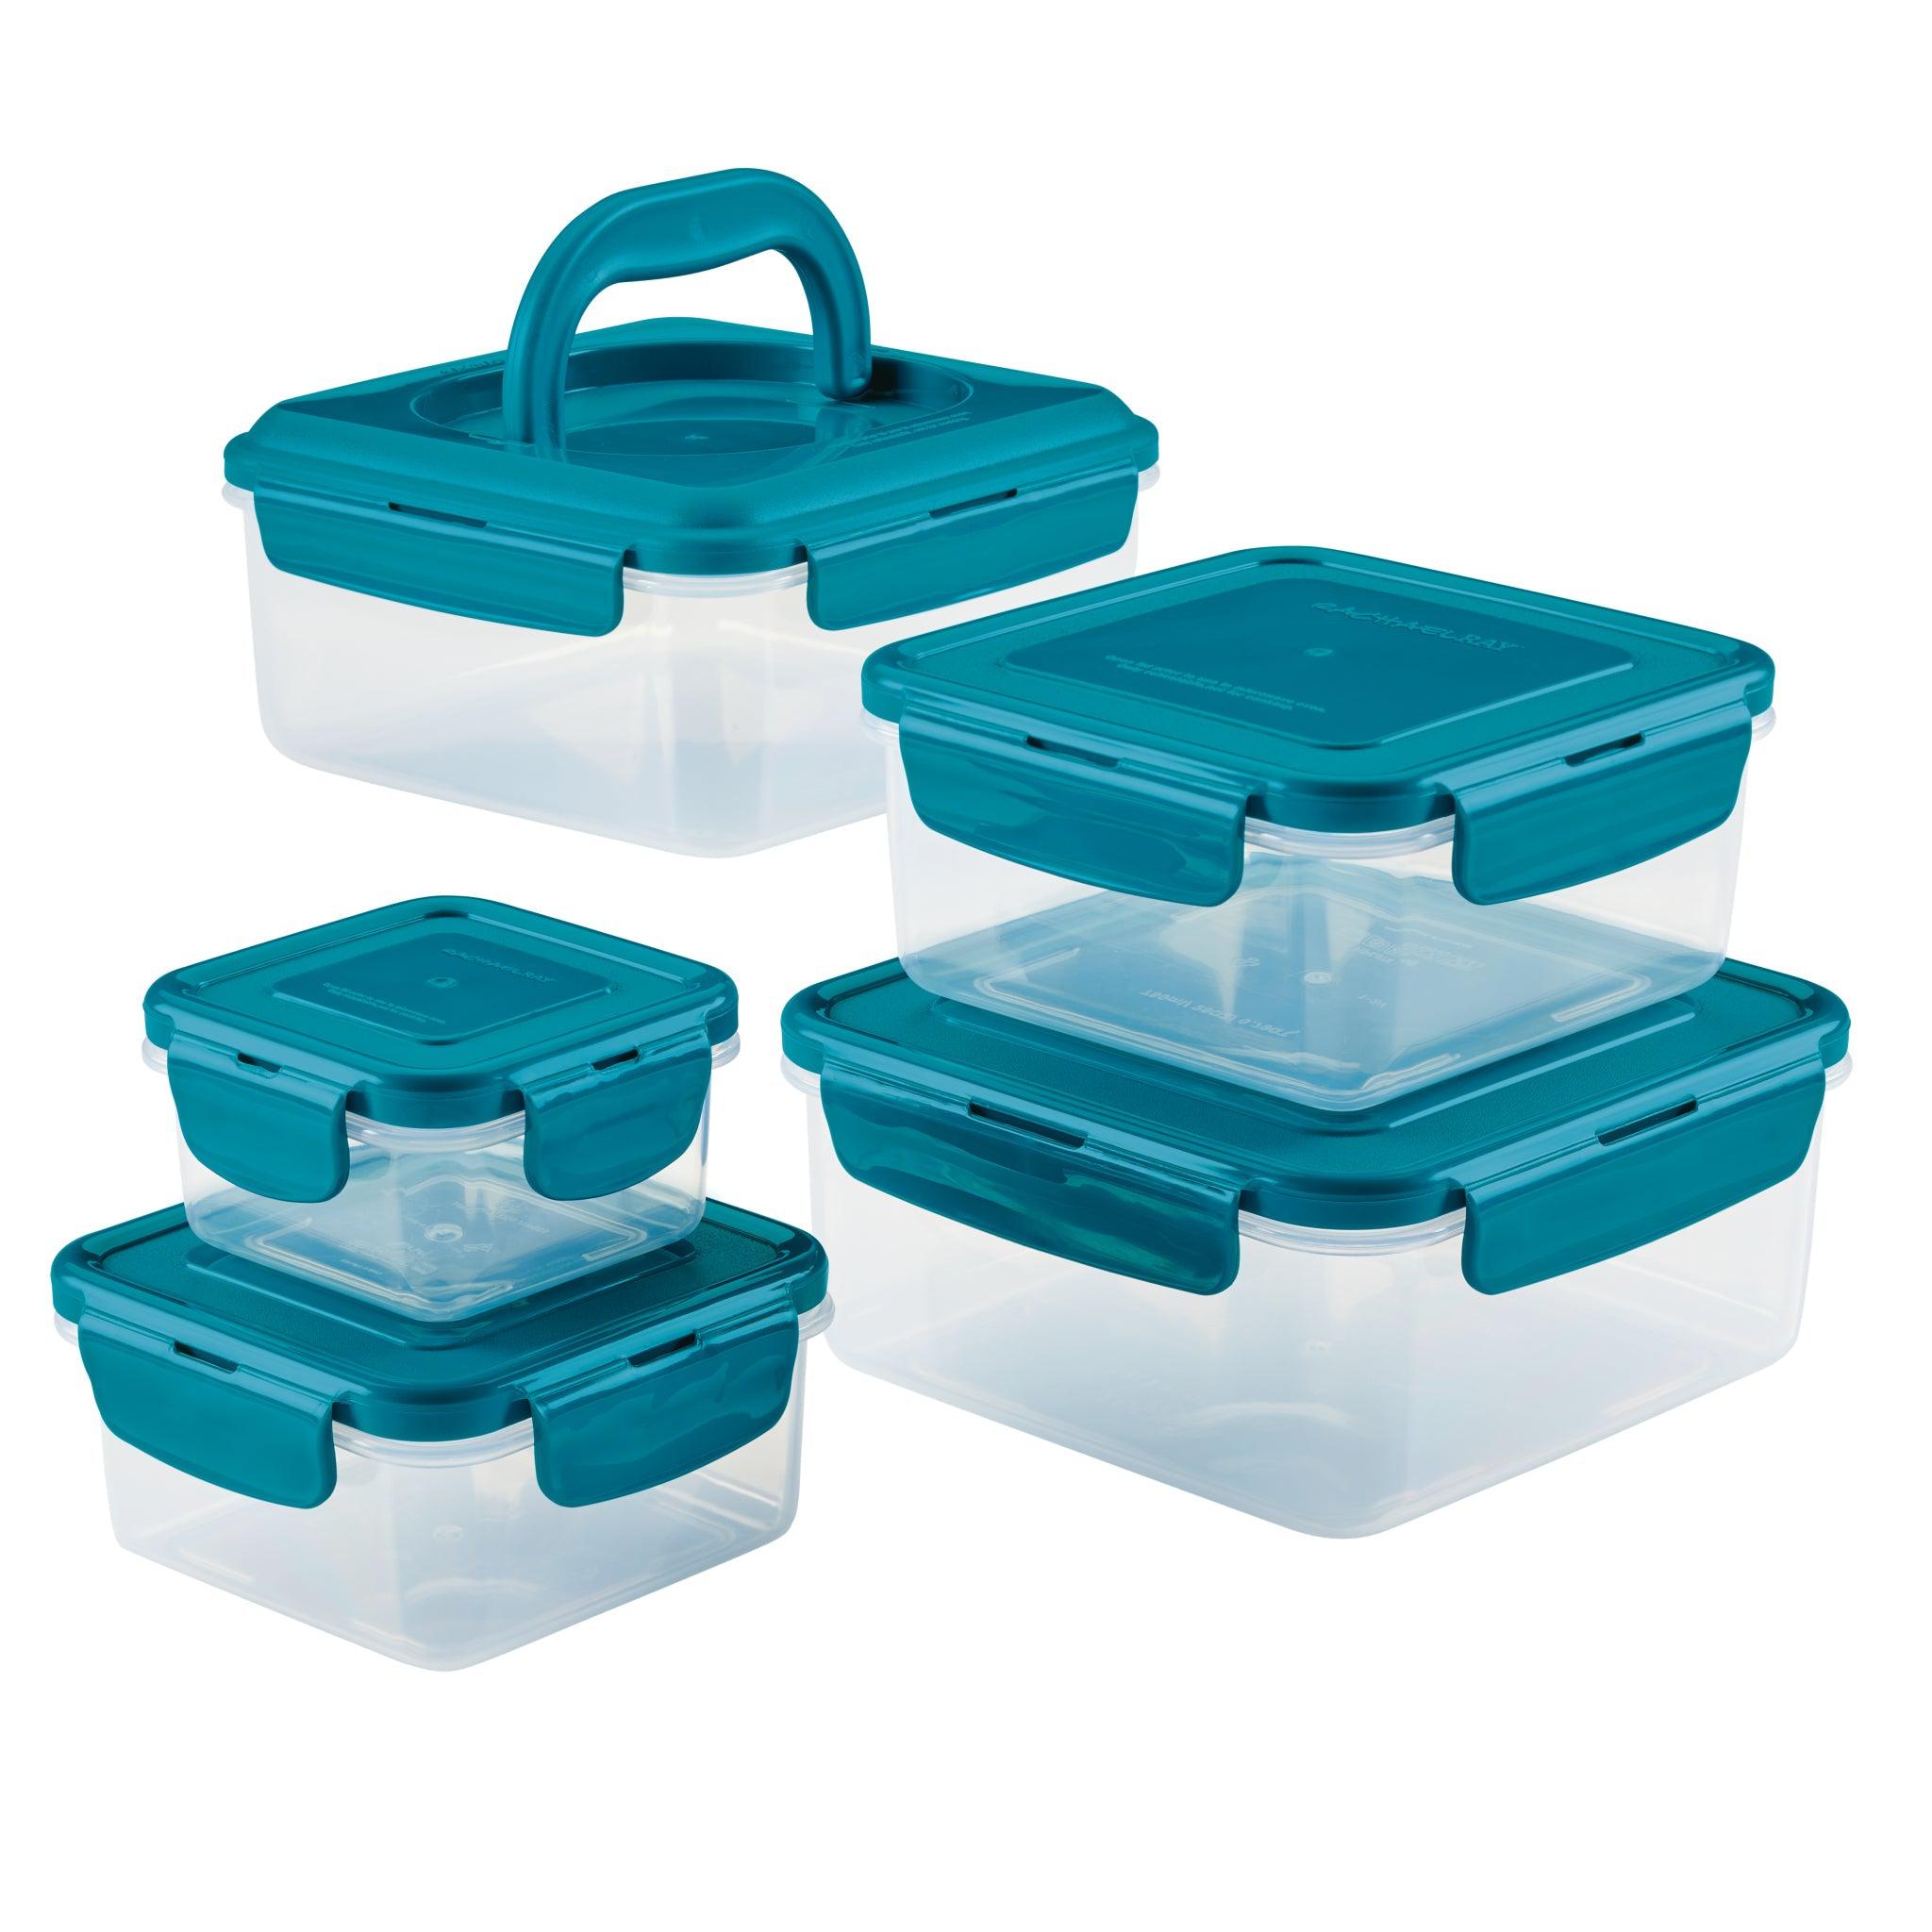 Better Homes & Gardens Flip-Tite Square Food Storage Container, 10 Cup - Set of 2